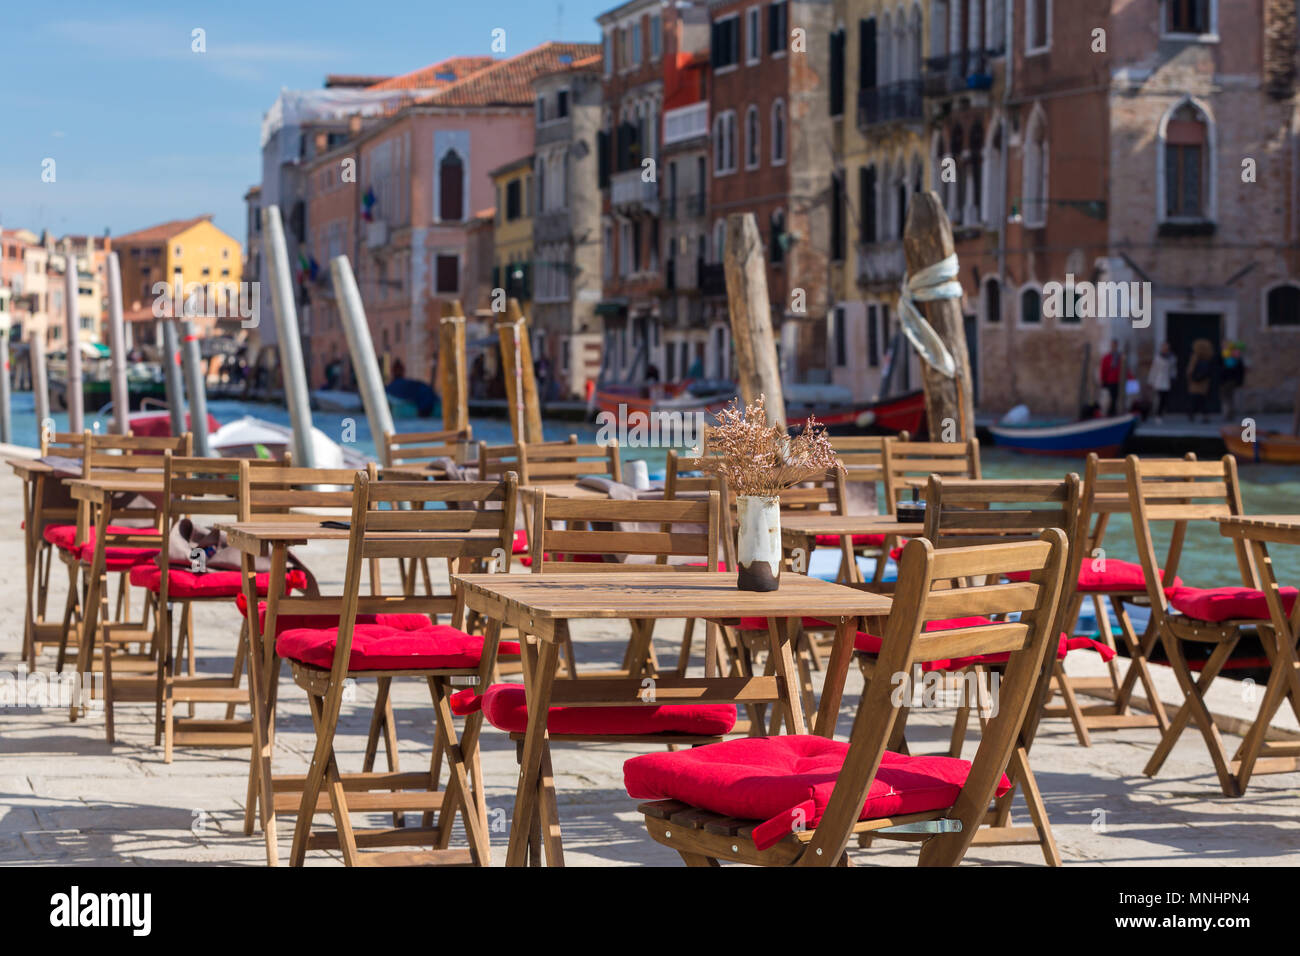 Street view of a cafe terrace with empty tables and chair in Venice, Italy. Stock Photo